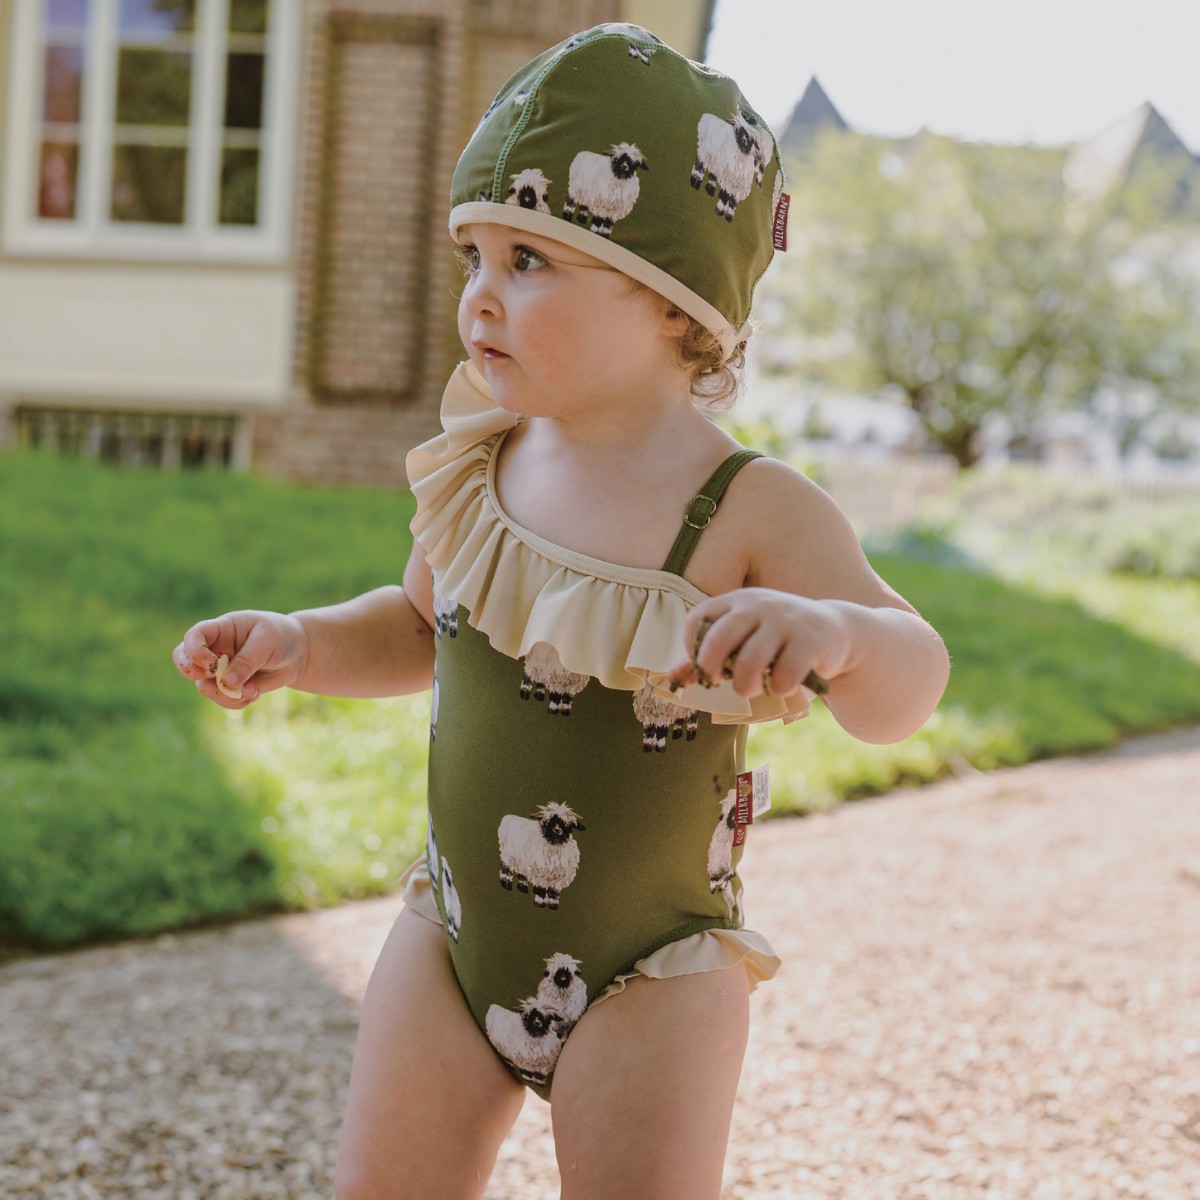 Baby girl by the pool and green grass wearing the Valais Sheep Ruffle Off Shoulder One Piece Swimsuit by Milkbarn